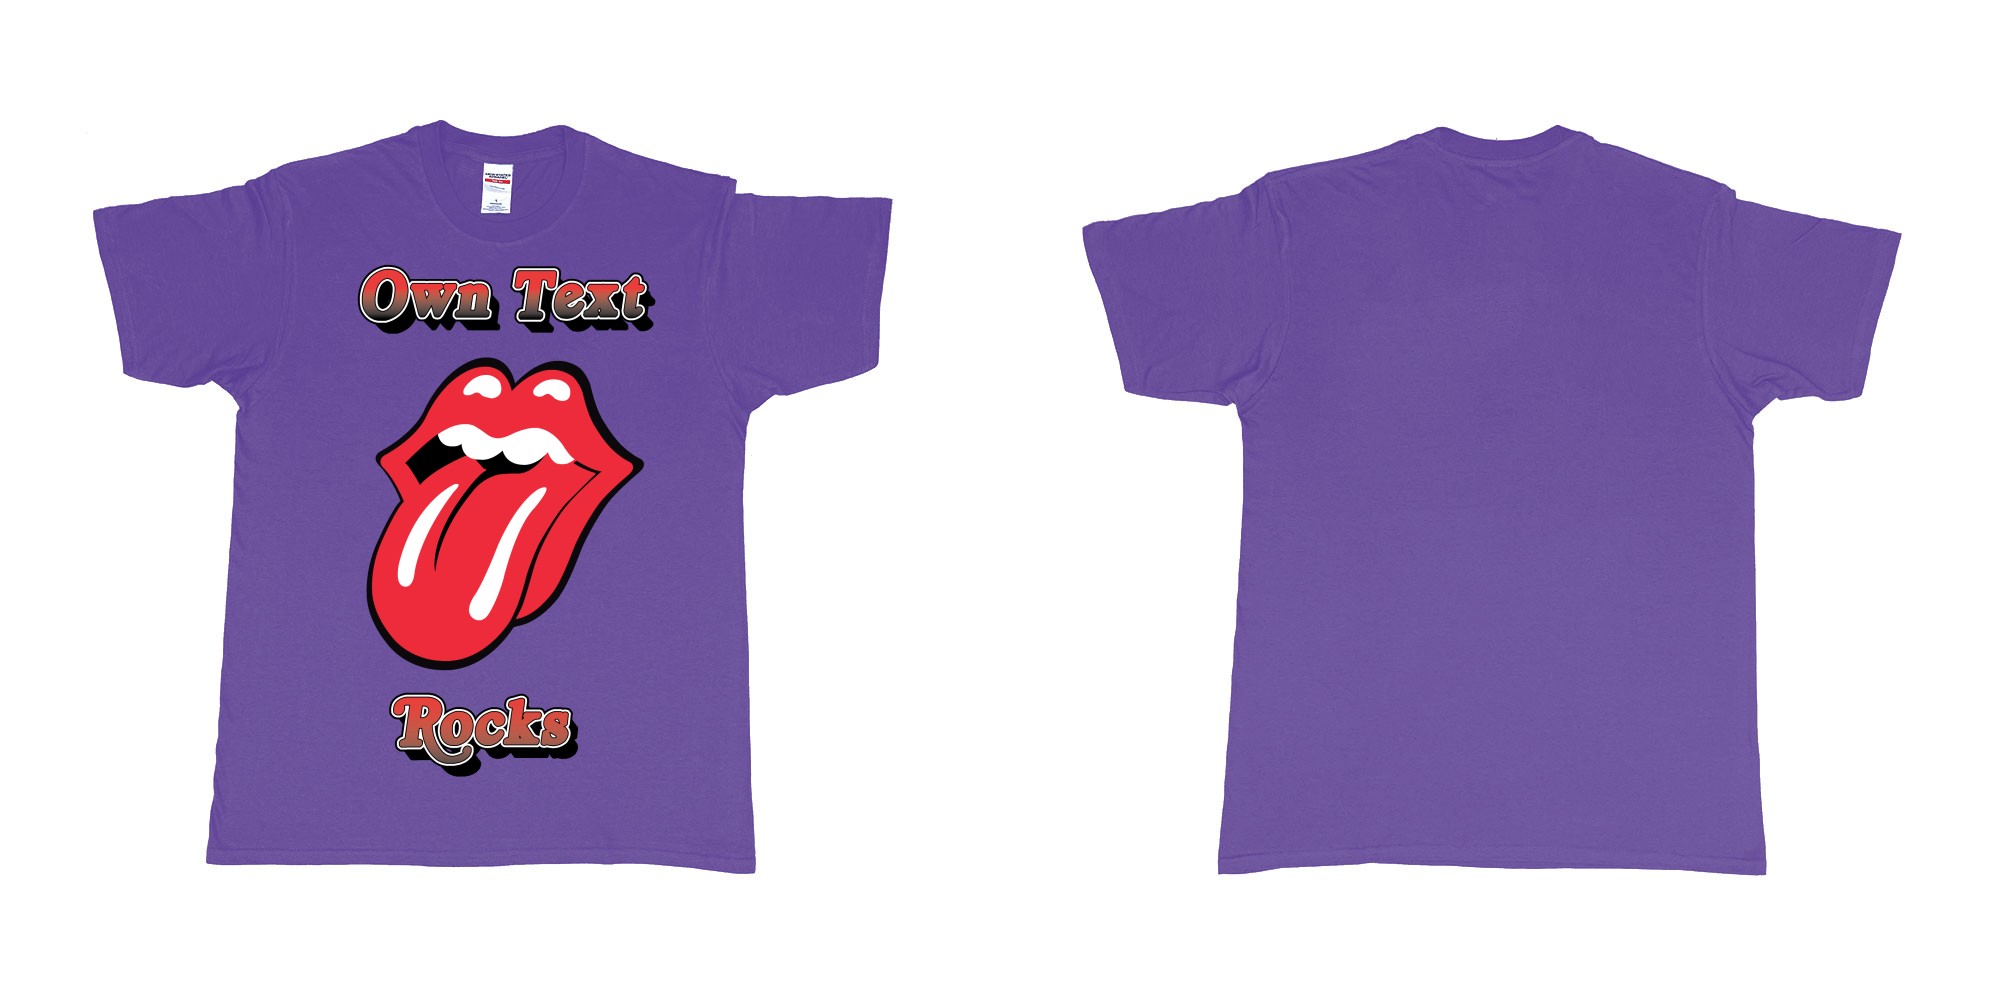 Custom tshirt design own custom text rocks rolling stones logo red tongue and lips print bali in fabric color purple choice your own text made in Bali by The Pirate Way